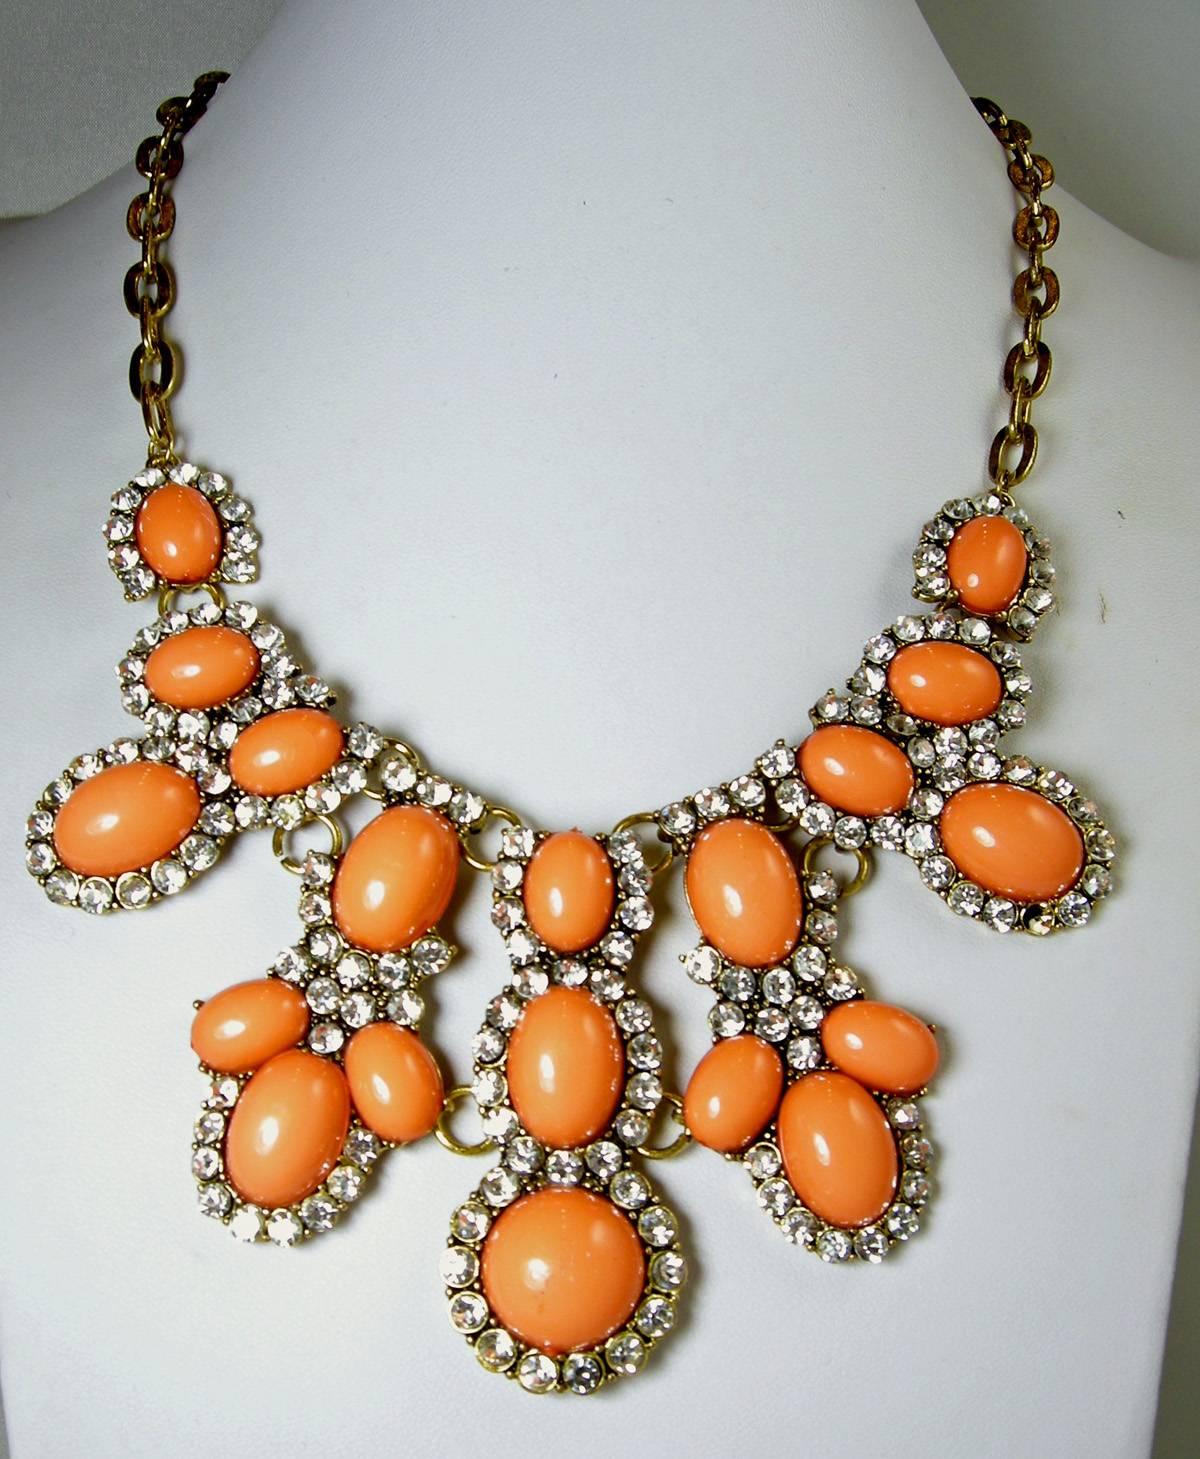 When I first saw this beautiful necklace I believed it was a Kenneth Jay Lane bib necklace. It features a centerpiece with faux coral colored cabochon stones all framed with rhinestones that came out in the late l960s. It has a brass tone open link